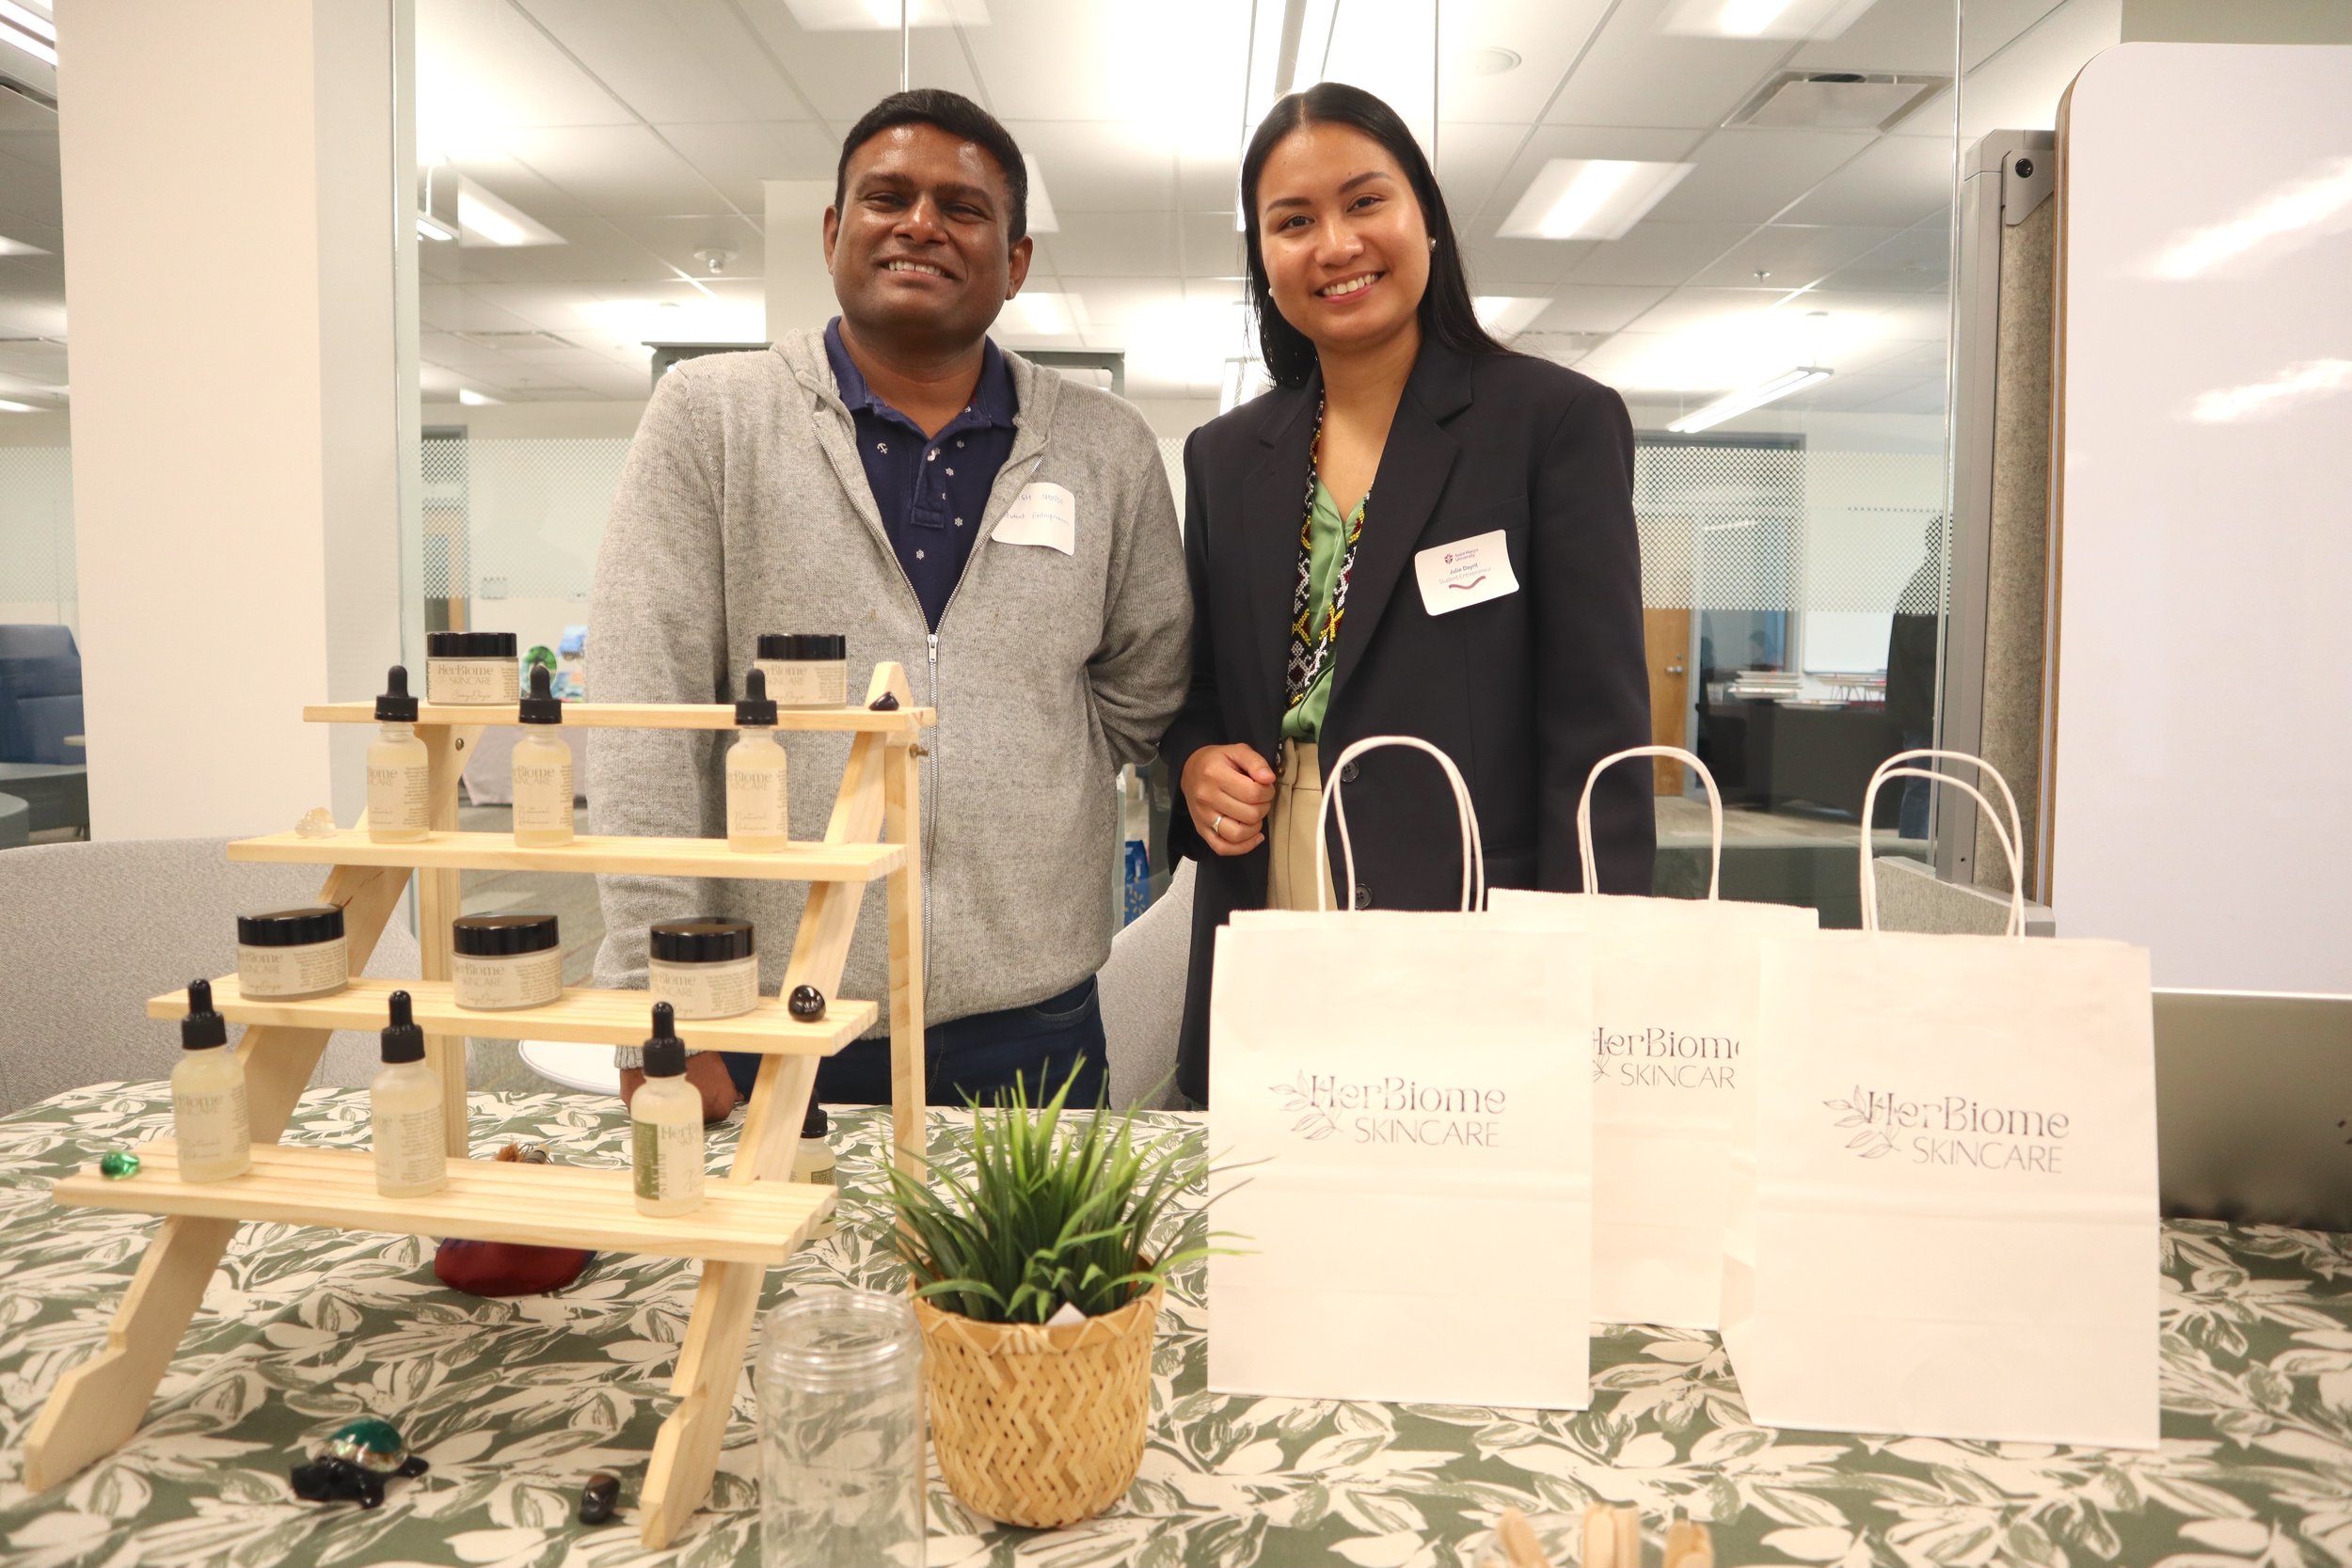  MTEI student Manish Shinde and MSc student Julie Dayrit with their business HerBiome Skincare 